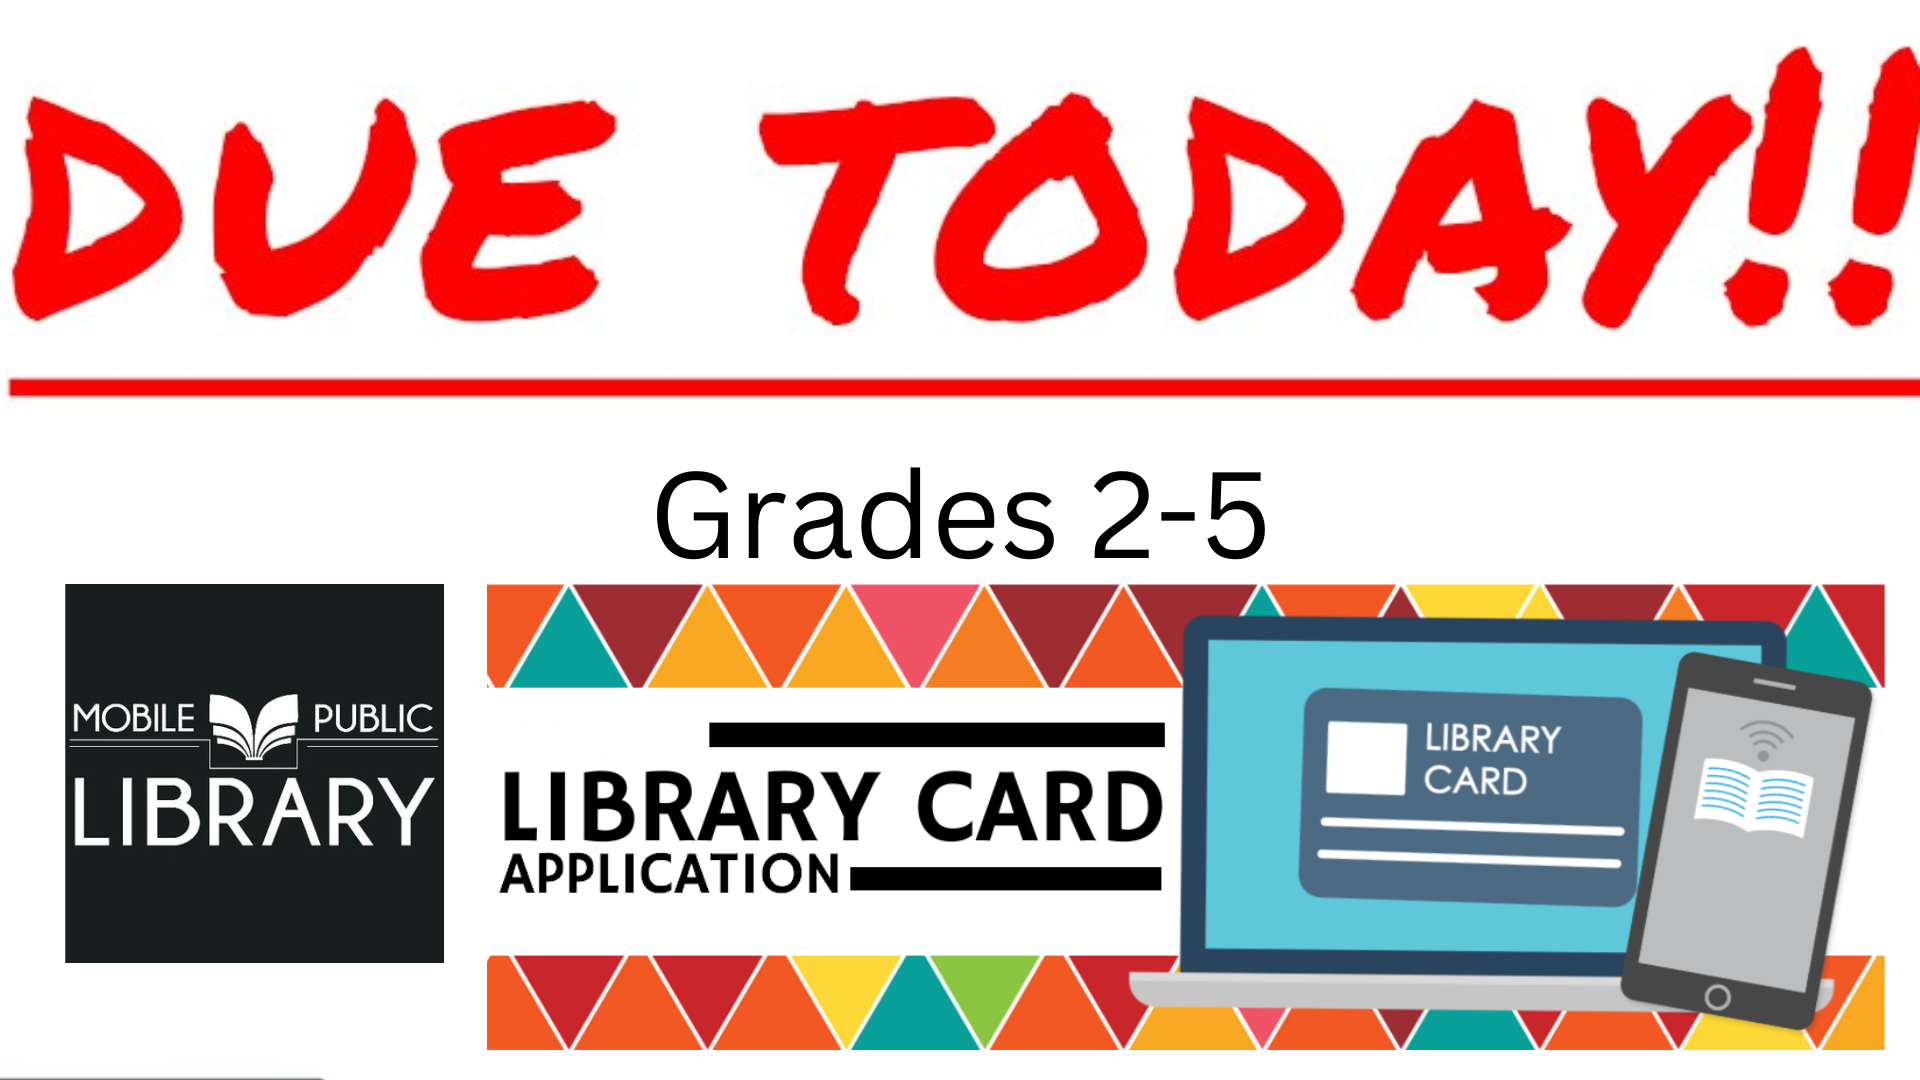 Library card application due today